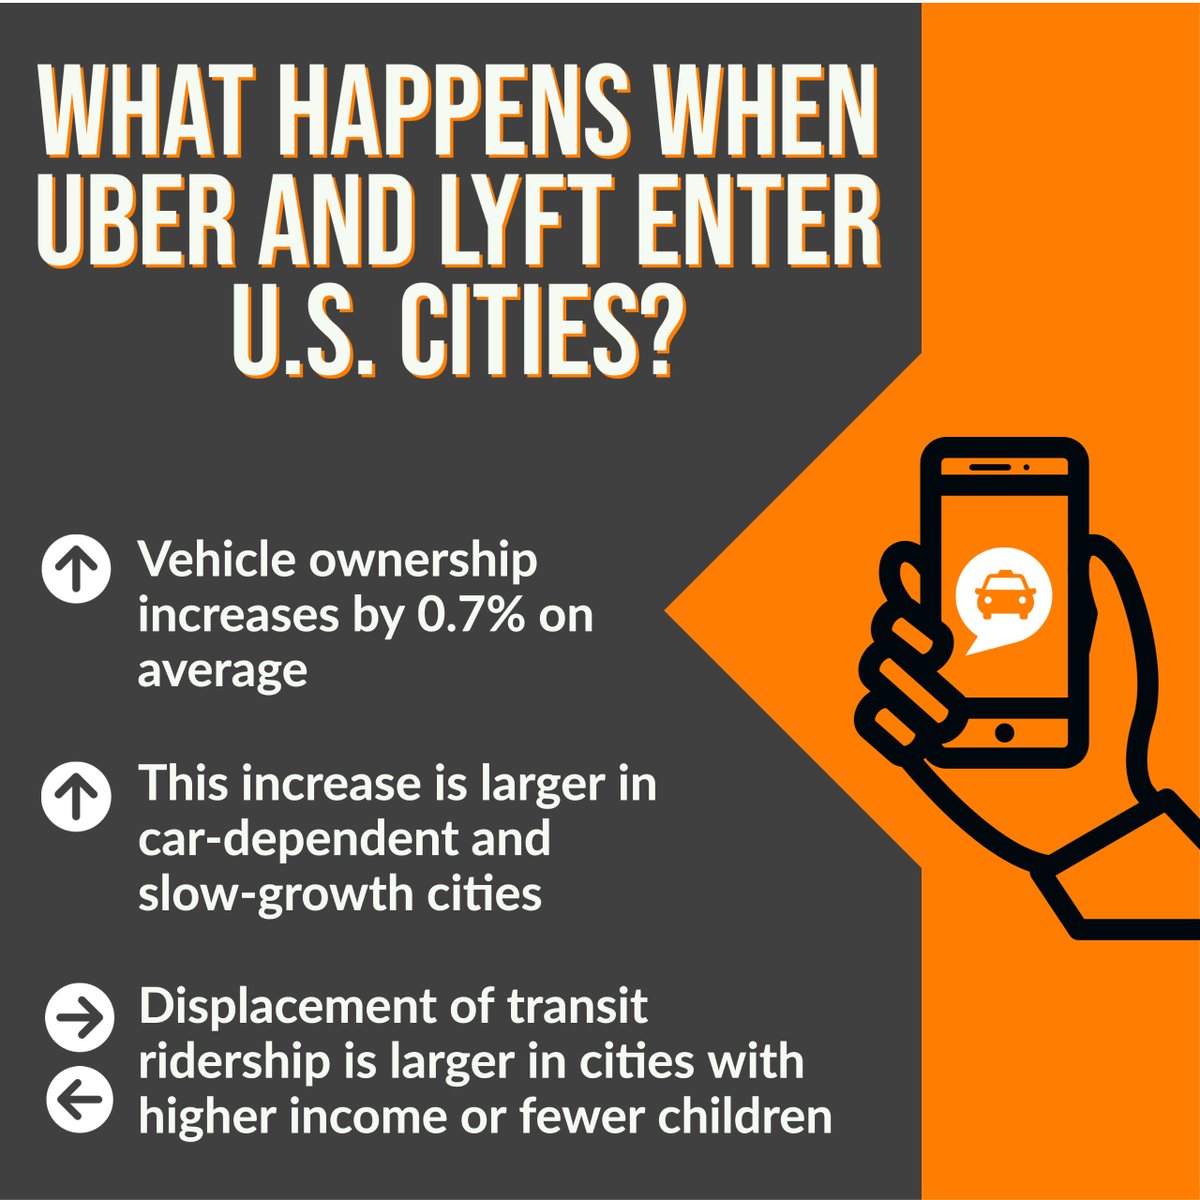 Timing is bad, but we published a huge study on Uber & Lyft impacts on cities & found they increase average vehicle ownership.  https://www.cell.com/iscience/fulltext/S2589-0042(20)31130-5 Anyway Uber is "skeptical of the methods" but guess what we anticipated this & controlled for the issues they raise, so stay mad